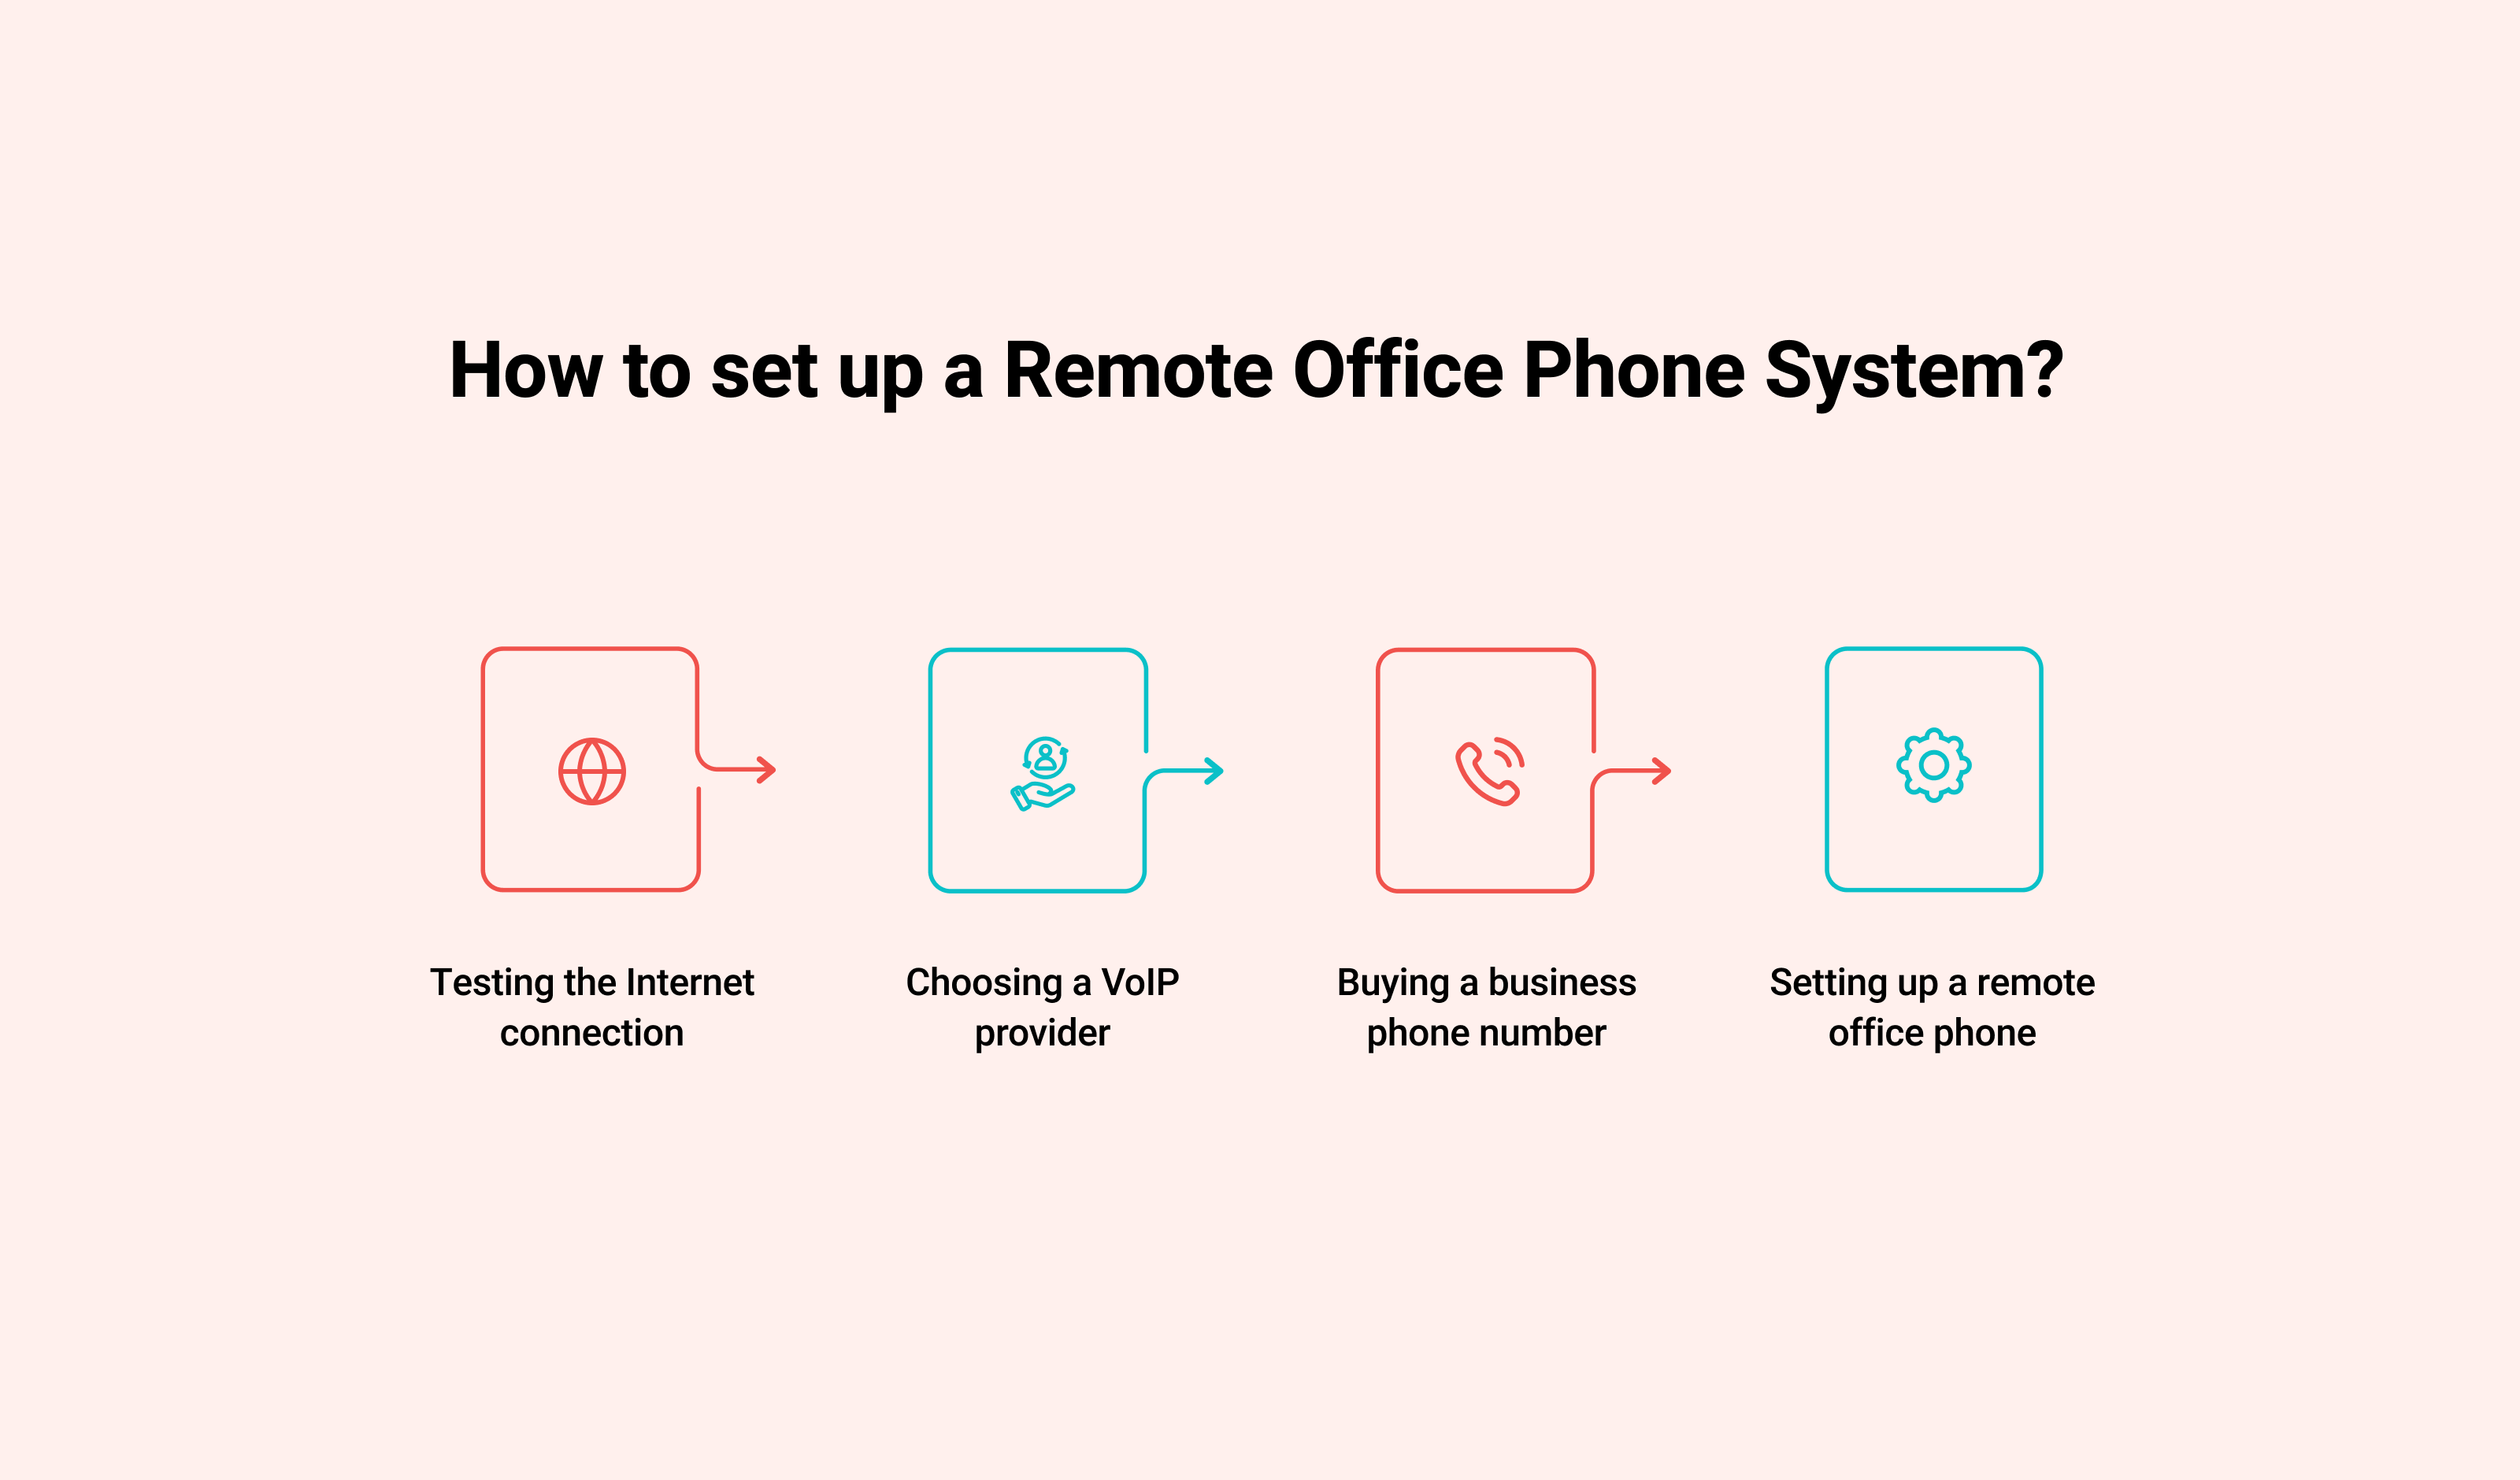 How to set up a Remote Office Phone System?